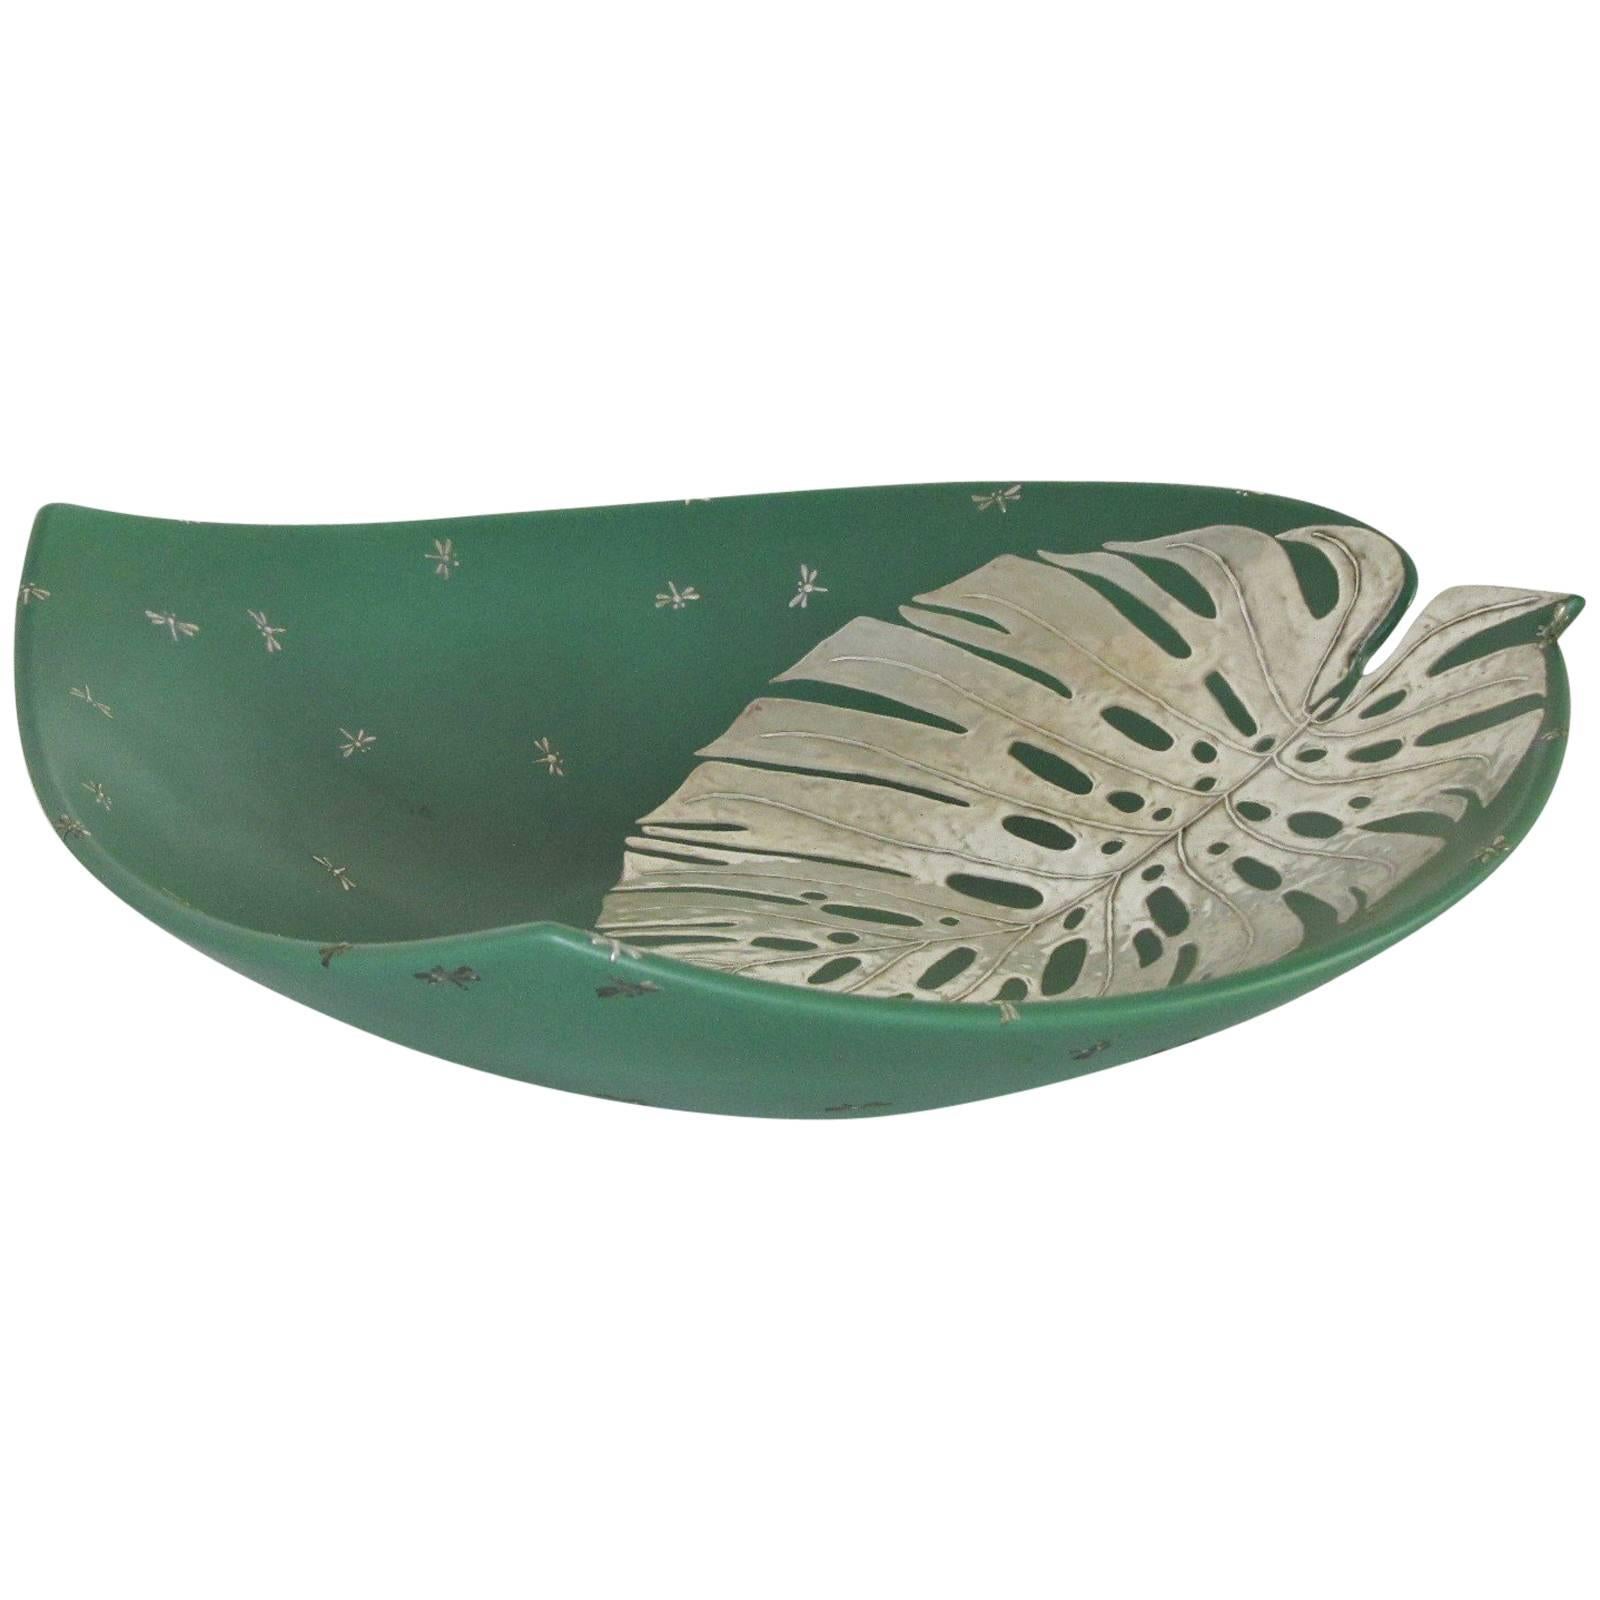 Large Exotic Tropical Design Silver Overlay Bowl by Emilia Castillo For Sale